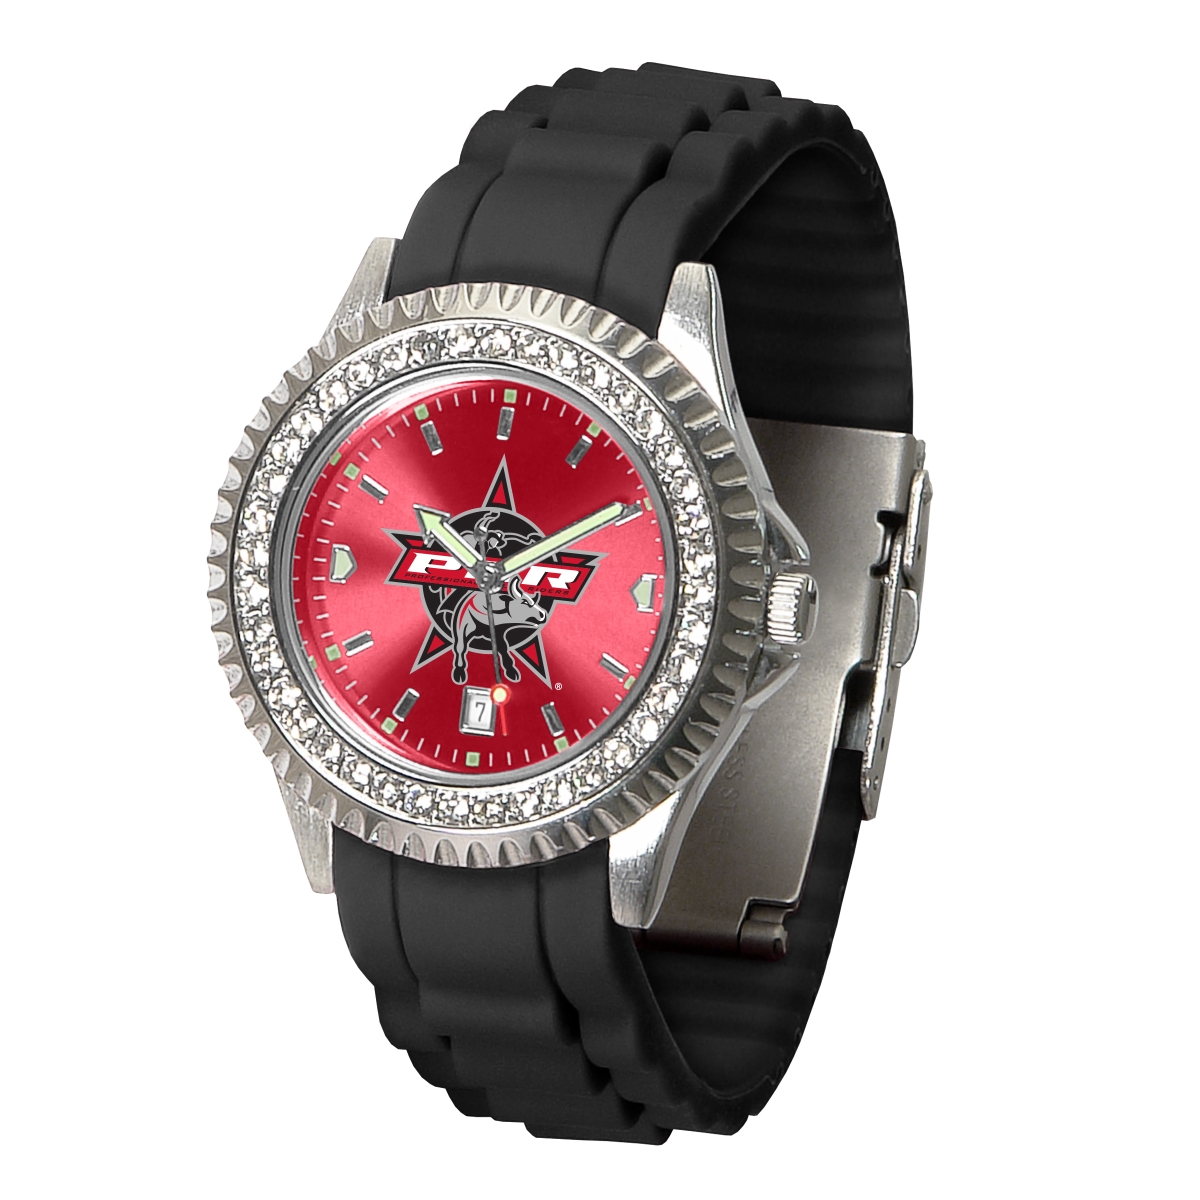 Picture of Game Time Watches PBR-SPK-RD-BKB Professional Bull Riders Sparkle Series Black Band Watch